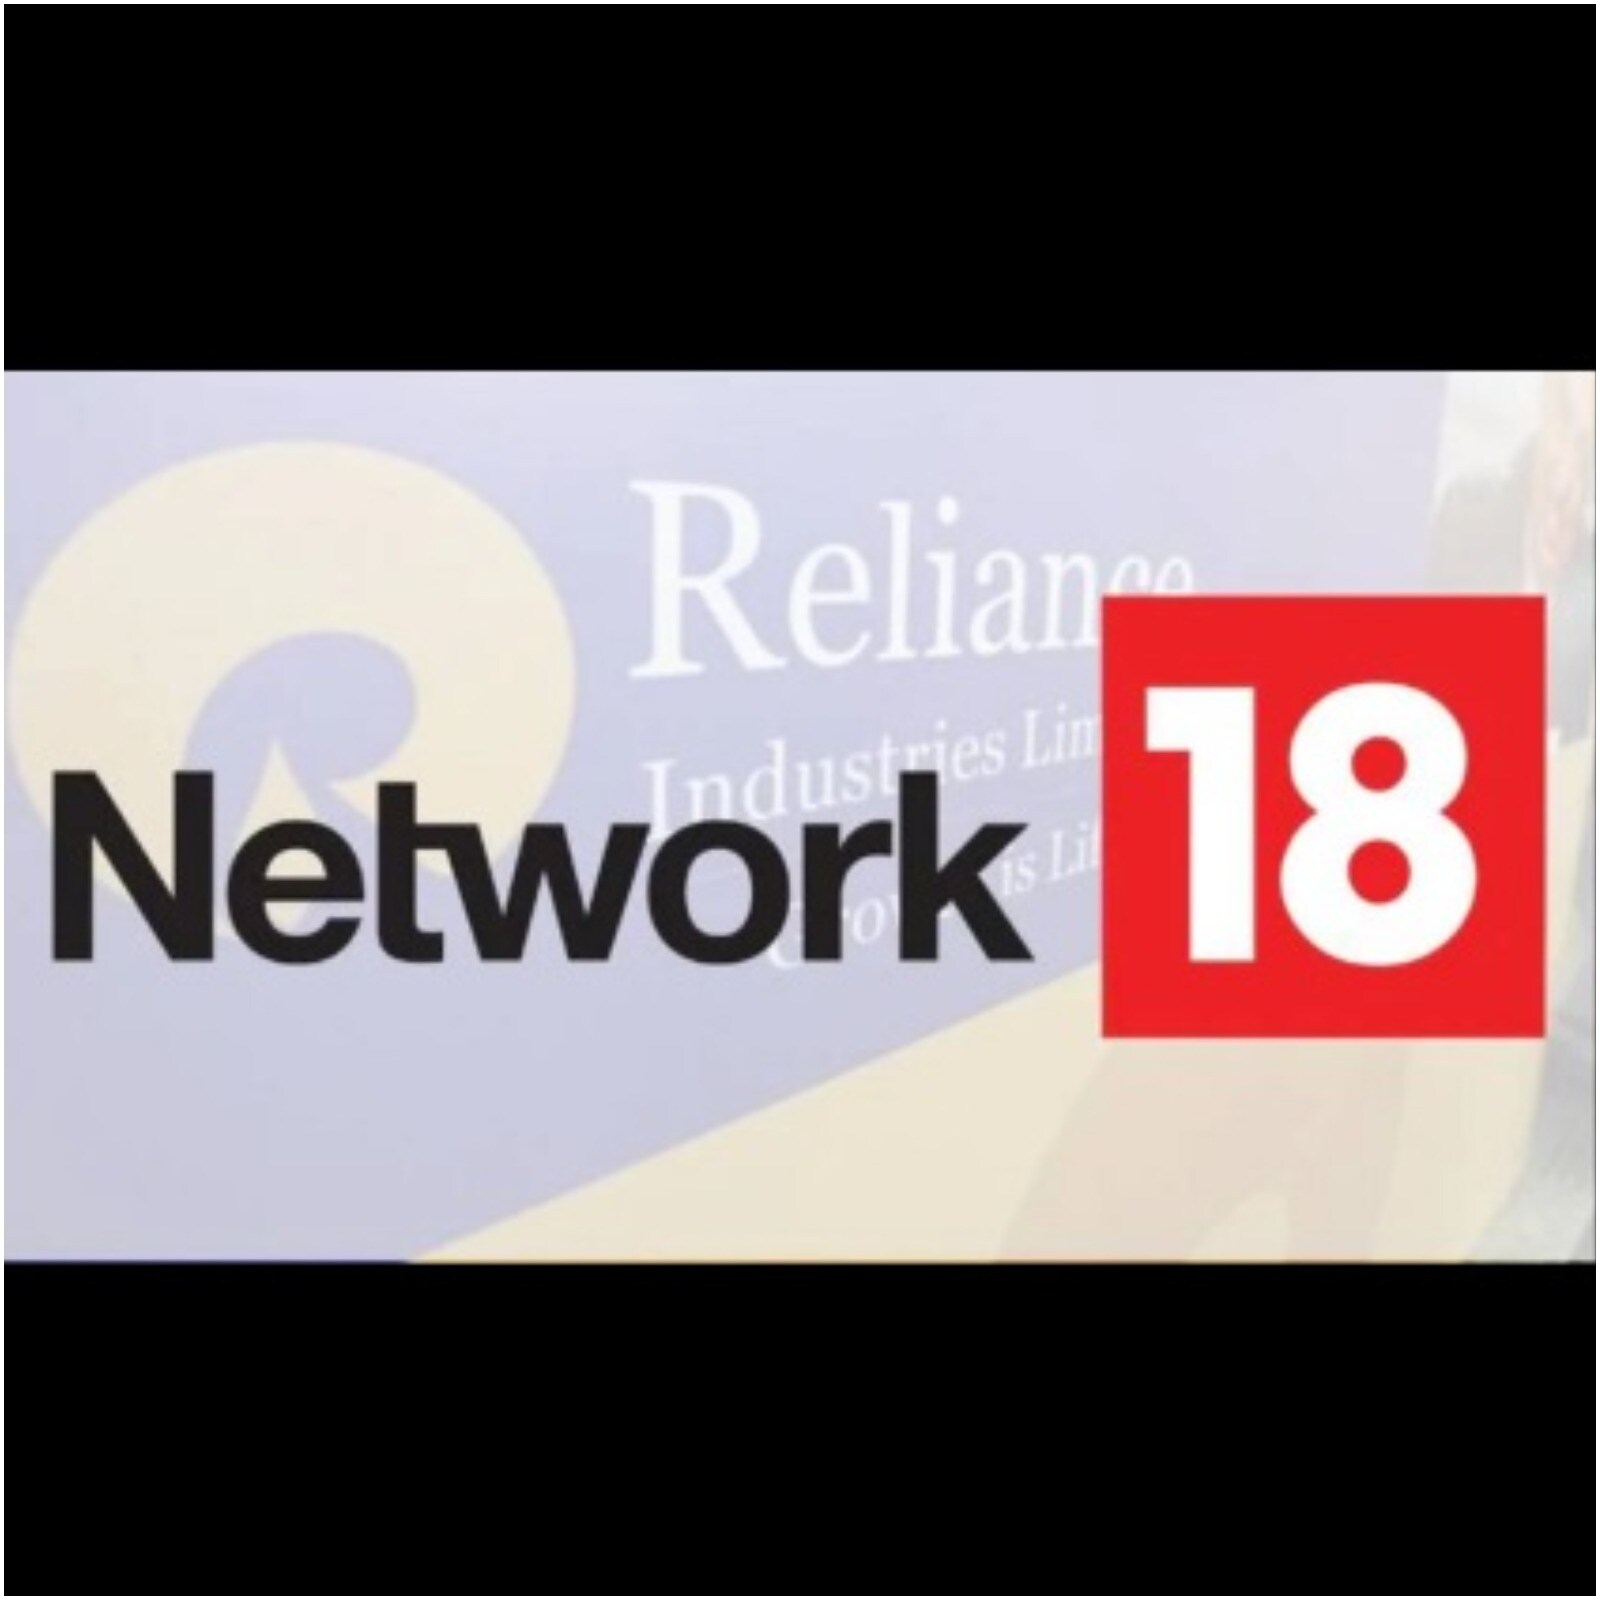 Top more than 199 network 18 logo latest